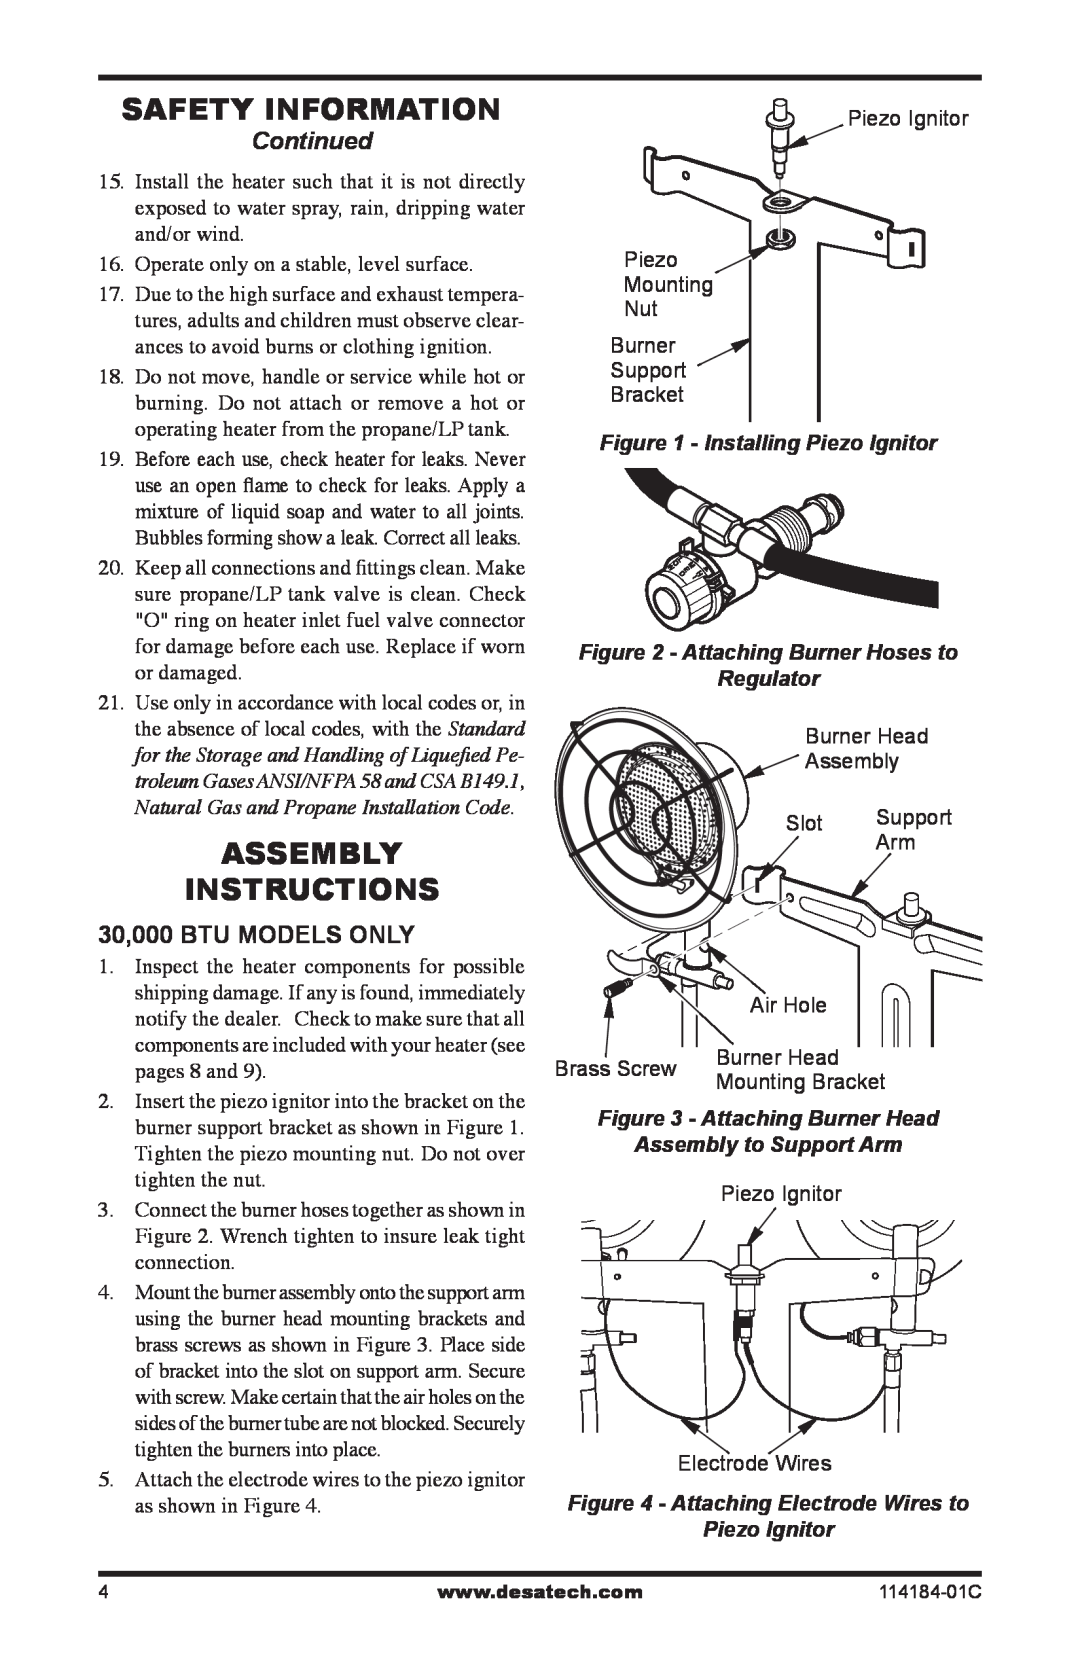 Desa SPC-15RB, HD15, N15, TT15, SPC-30RB, HD30B, TT30B owner manual Safety Information, Assembly Instructions, Continued 